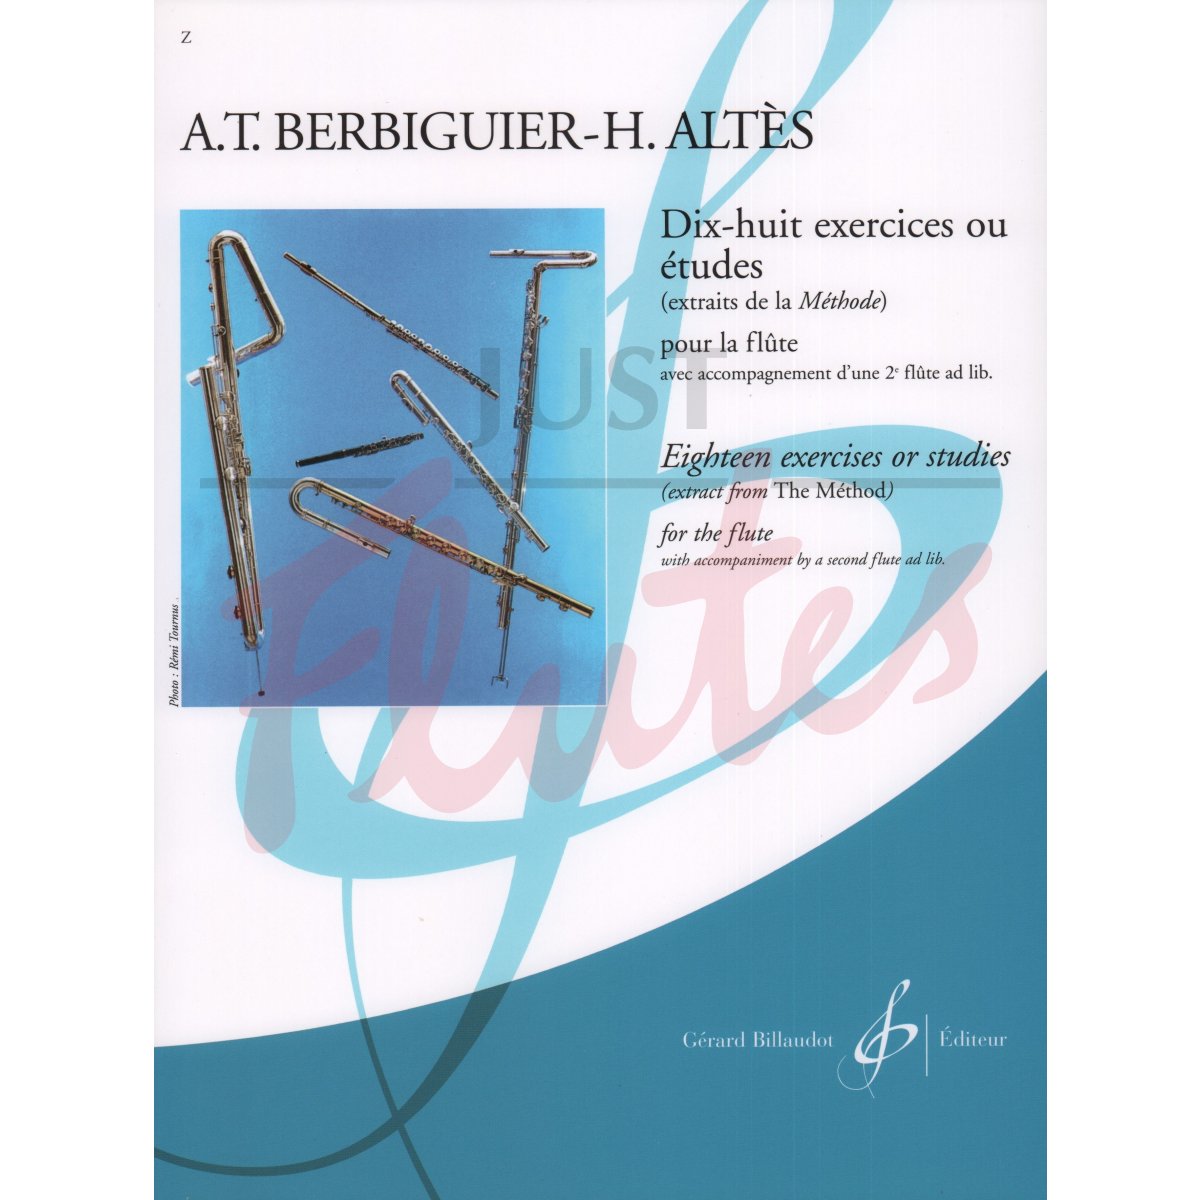 18 Exercises or Studies from Method for Flute (ad lib. 2nd flute part by Altes)